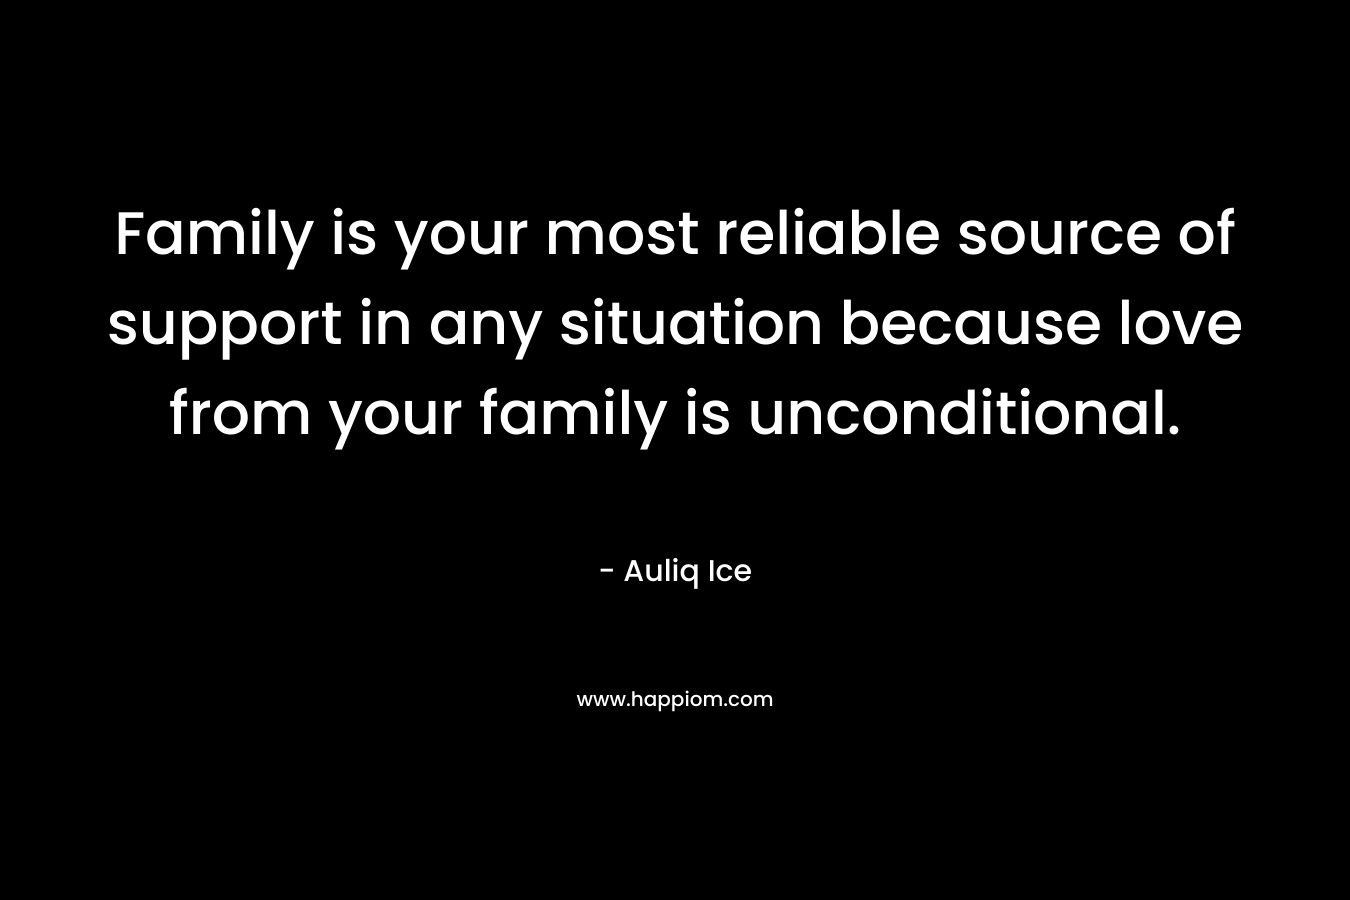 Family is your most reliable source of support in any situation because love from your family is unconditional.